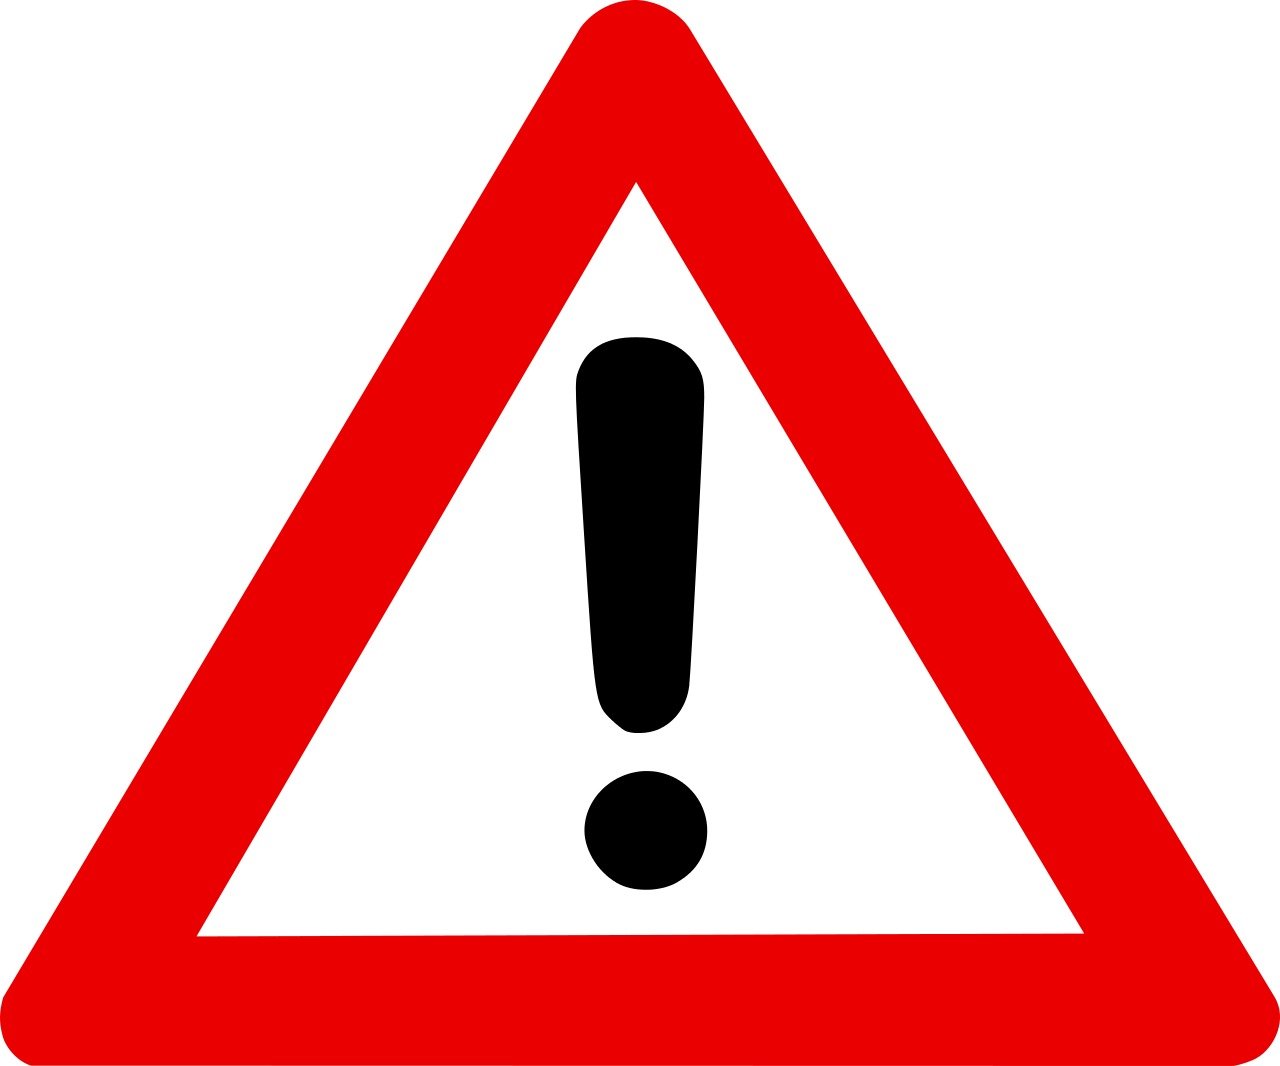 warning triangle sign on a white background